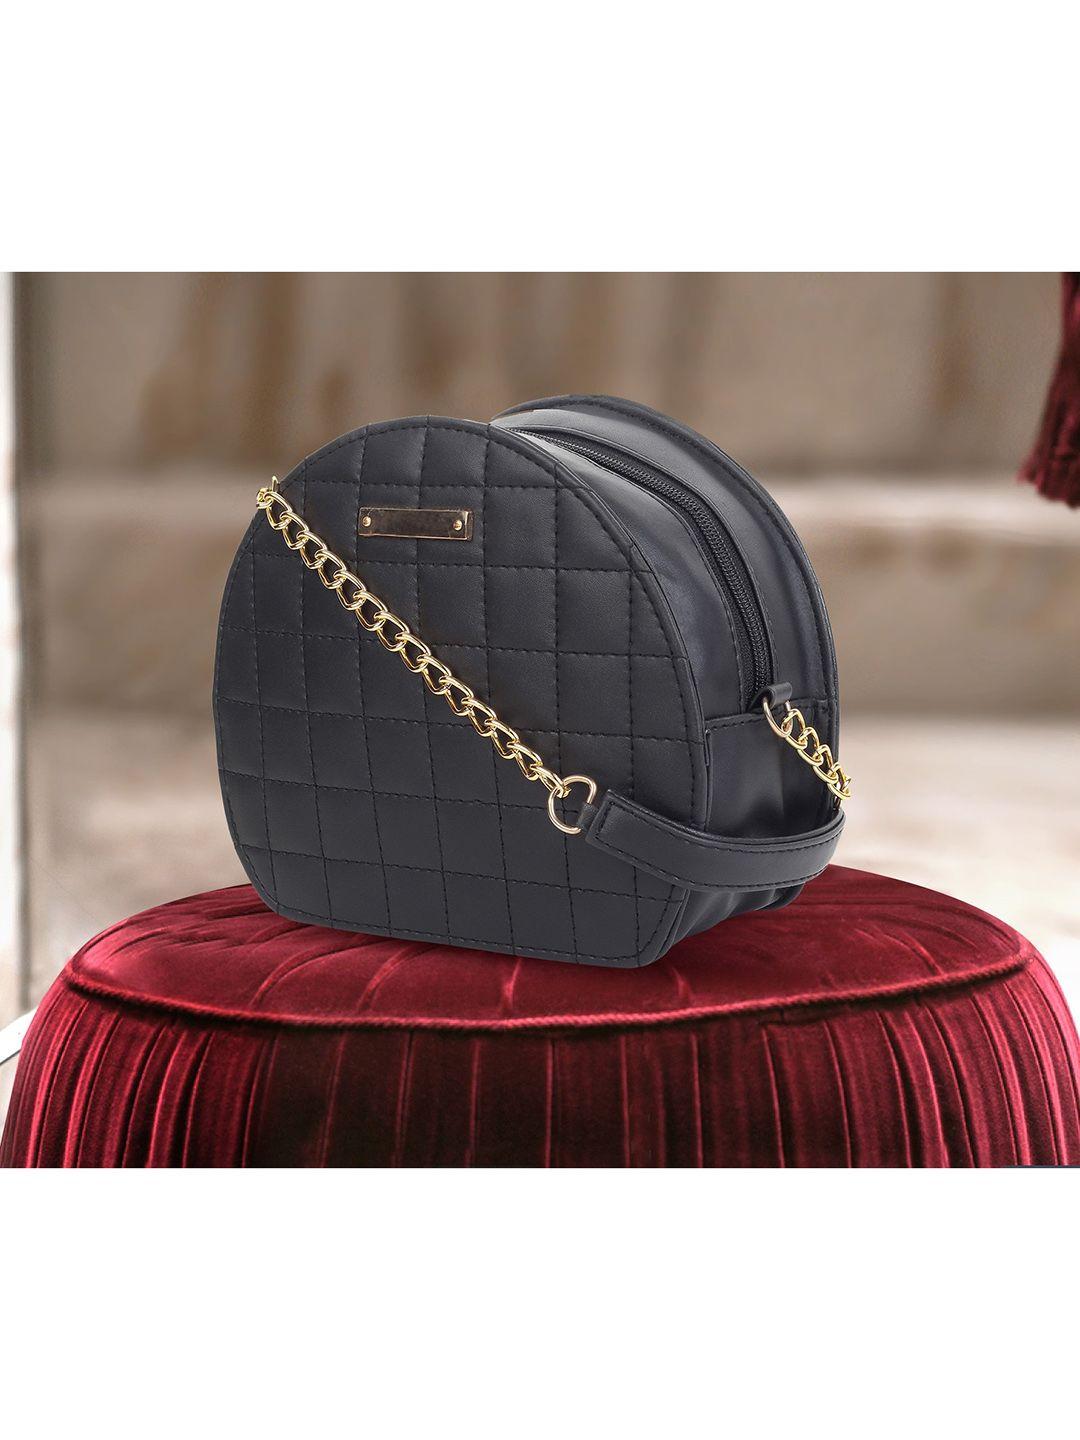 amyence black structured sling bag with quilted